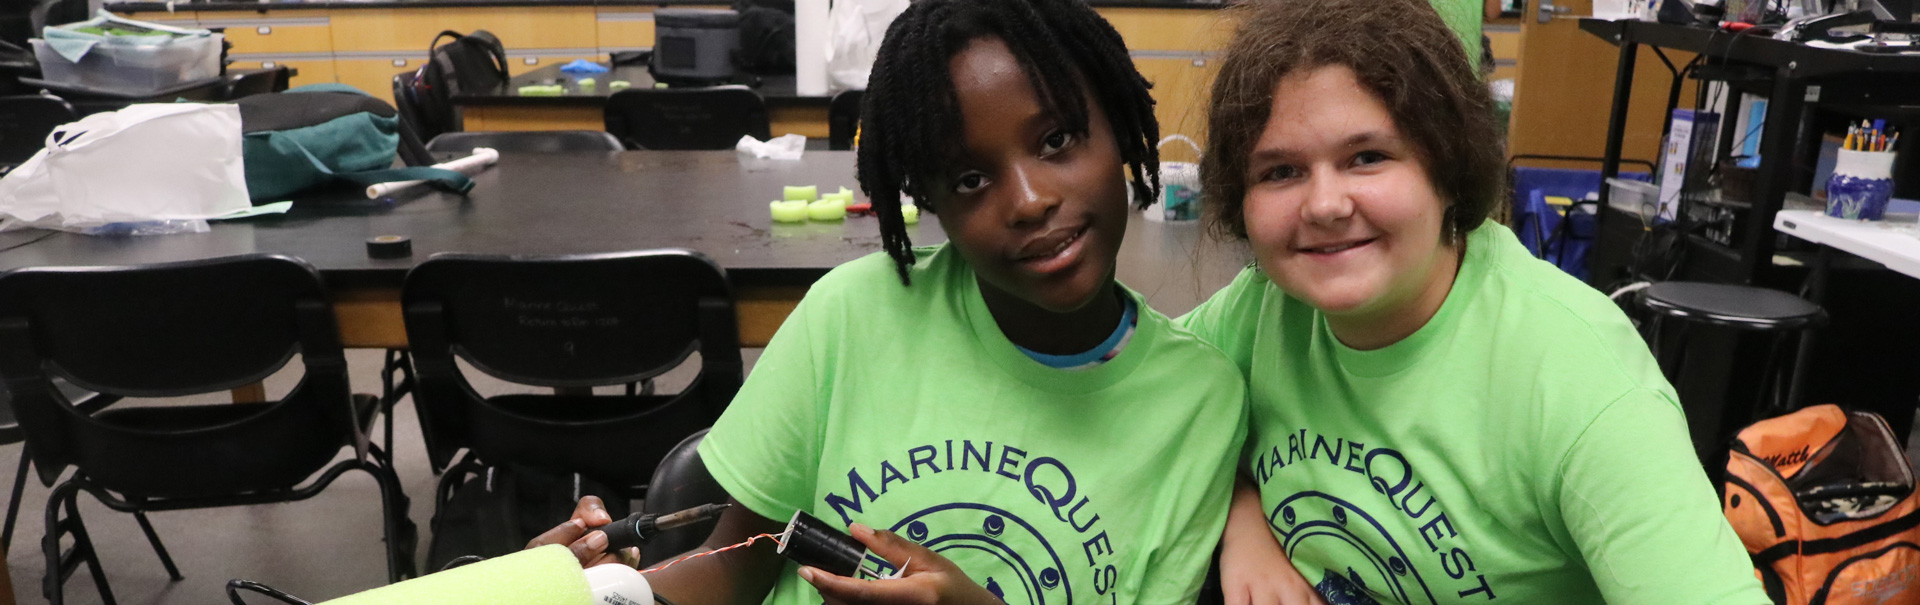 2 students in green marinquest shirts smile for the camera